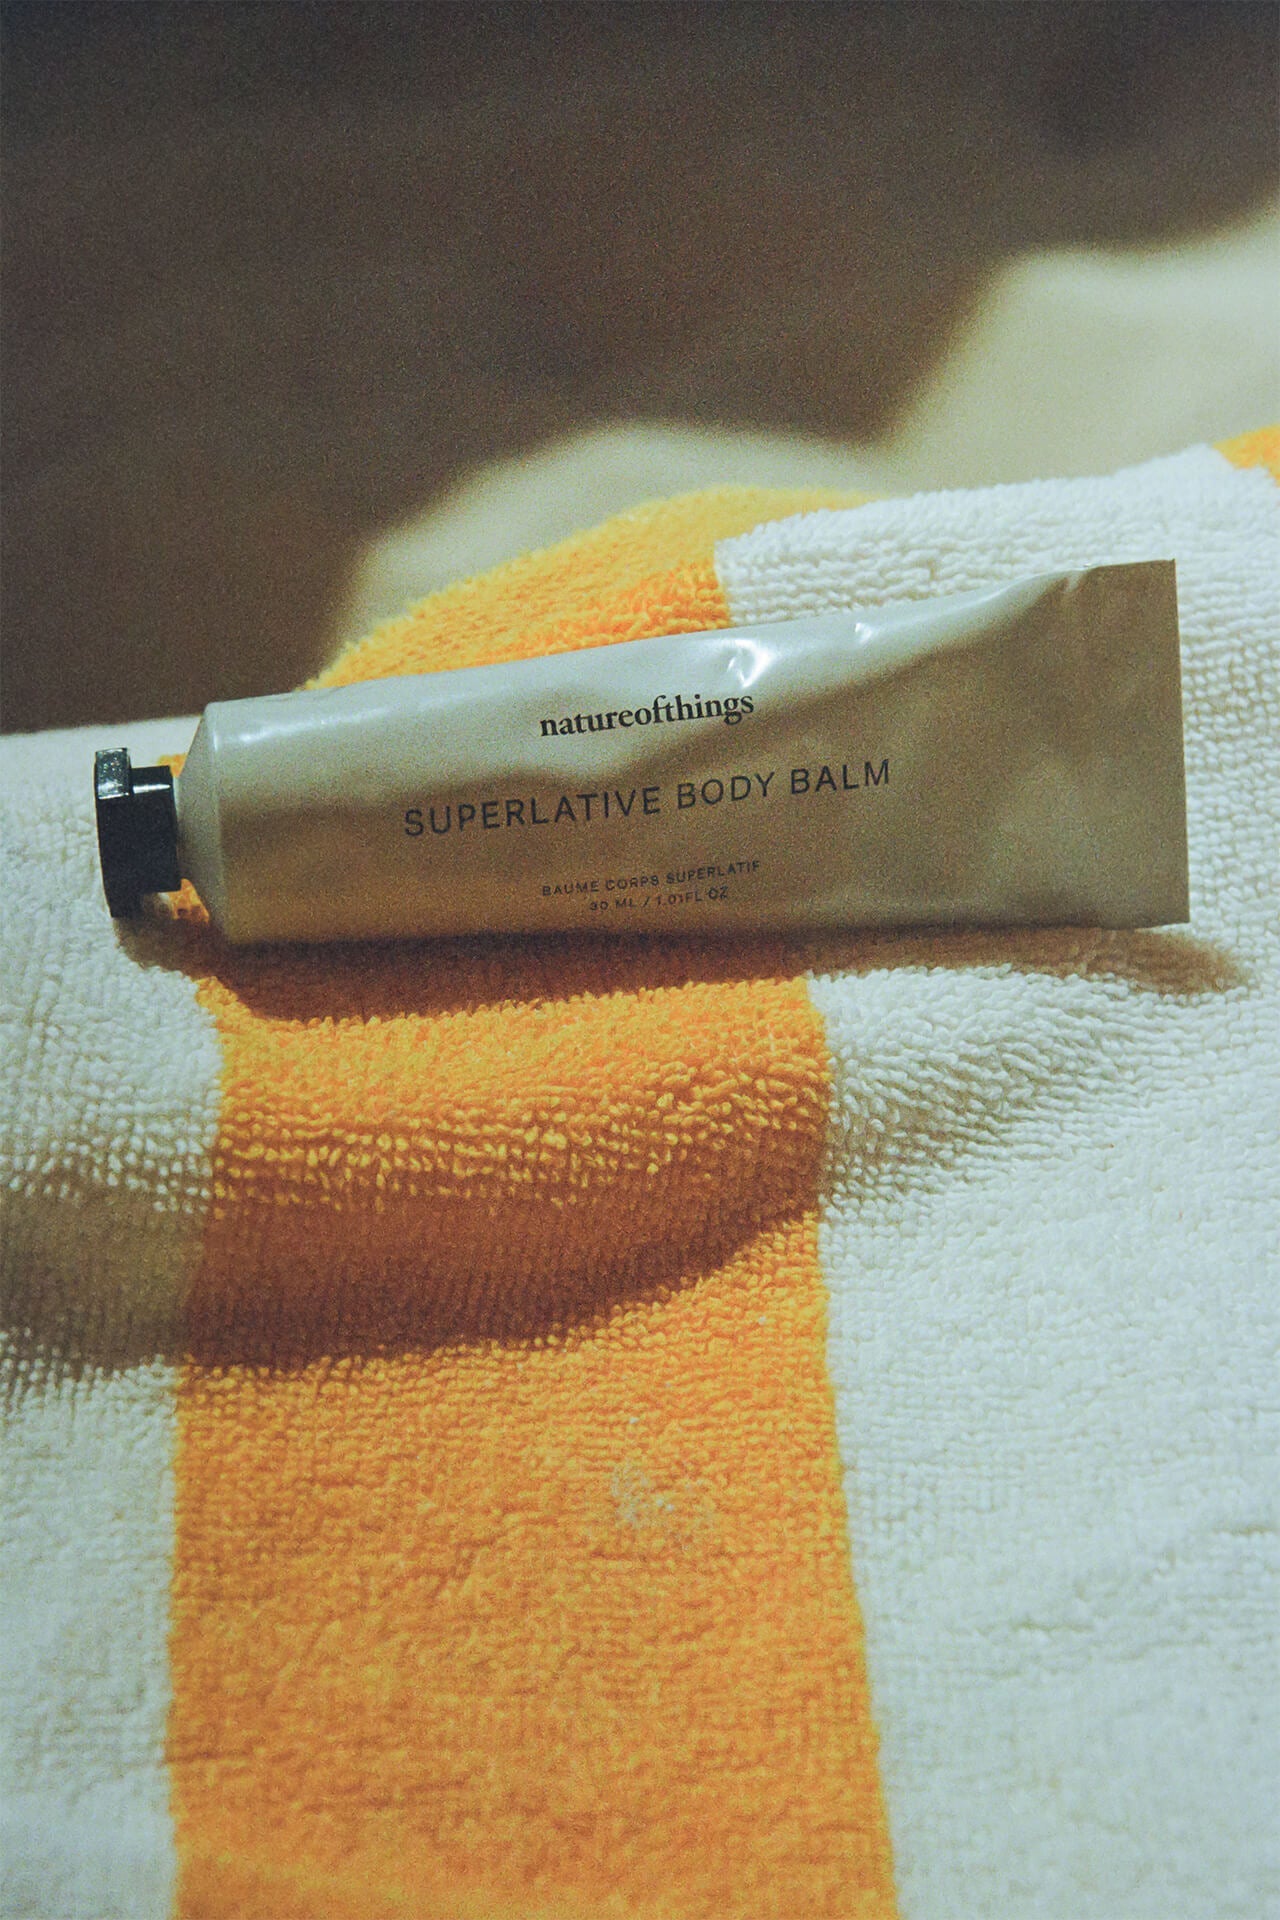 A tube of body balm sitting on a yellow and white towel.